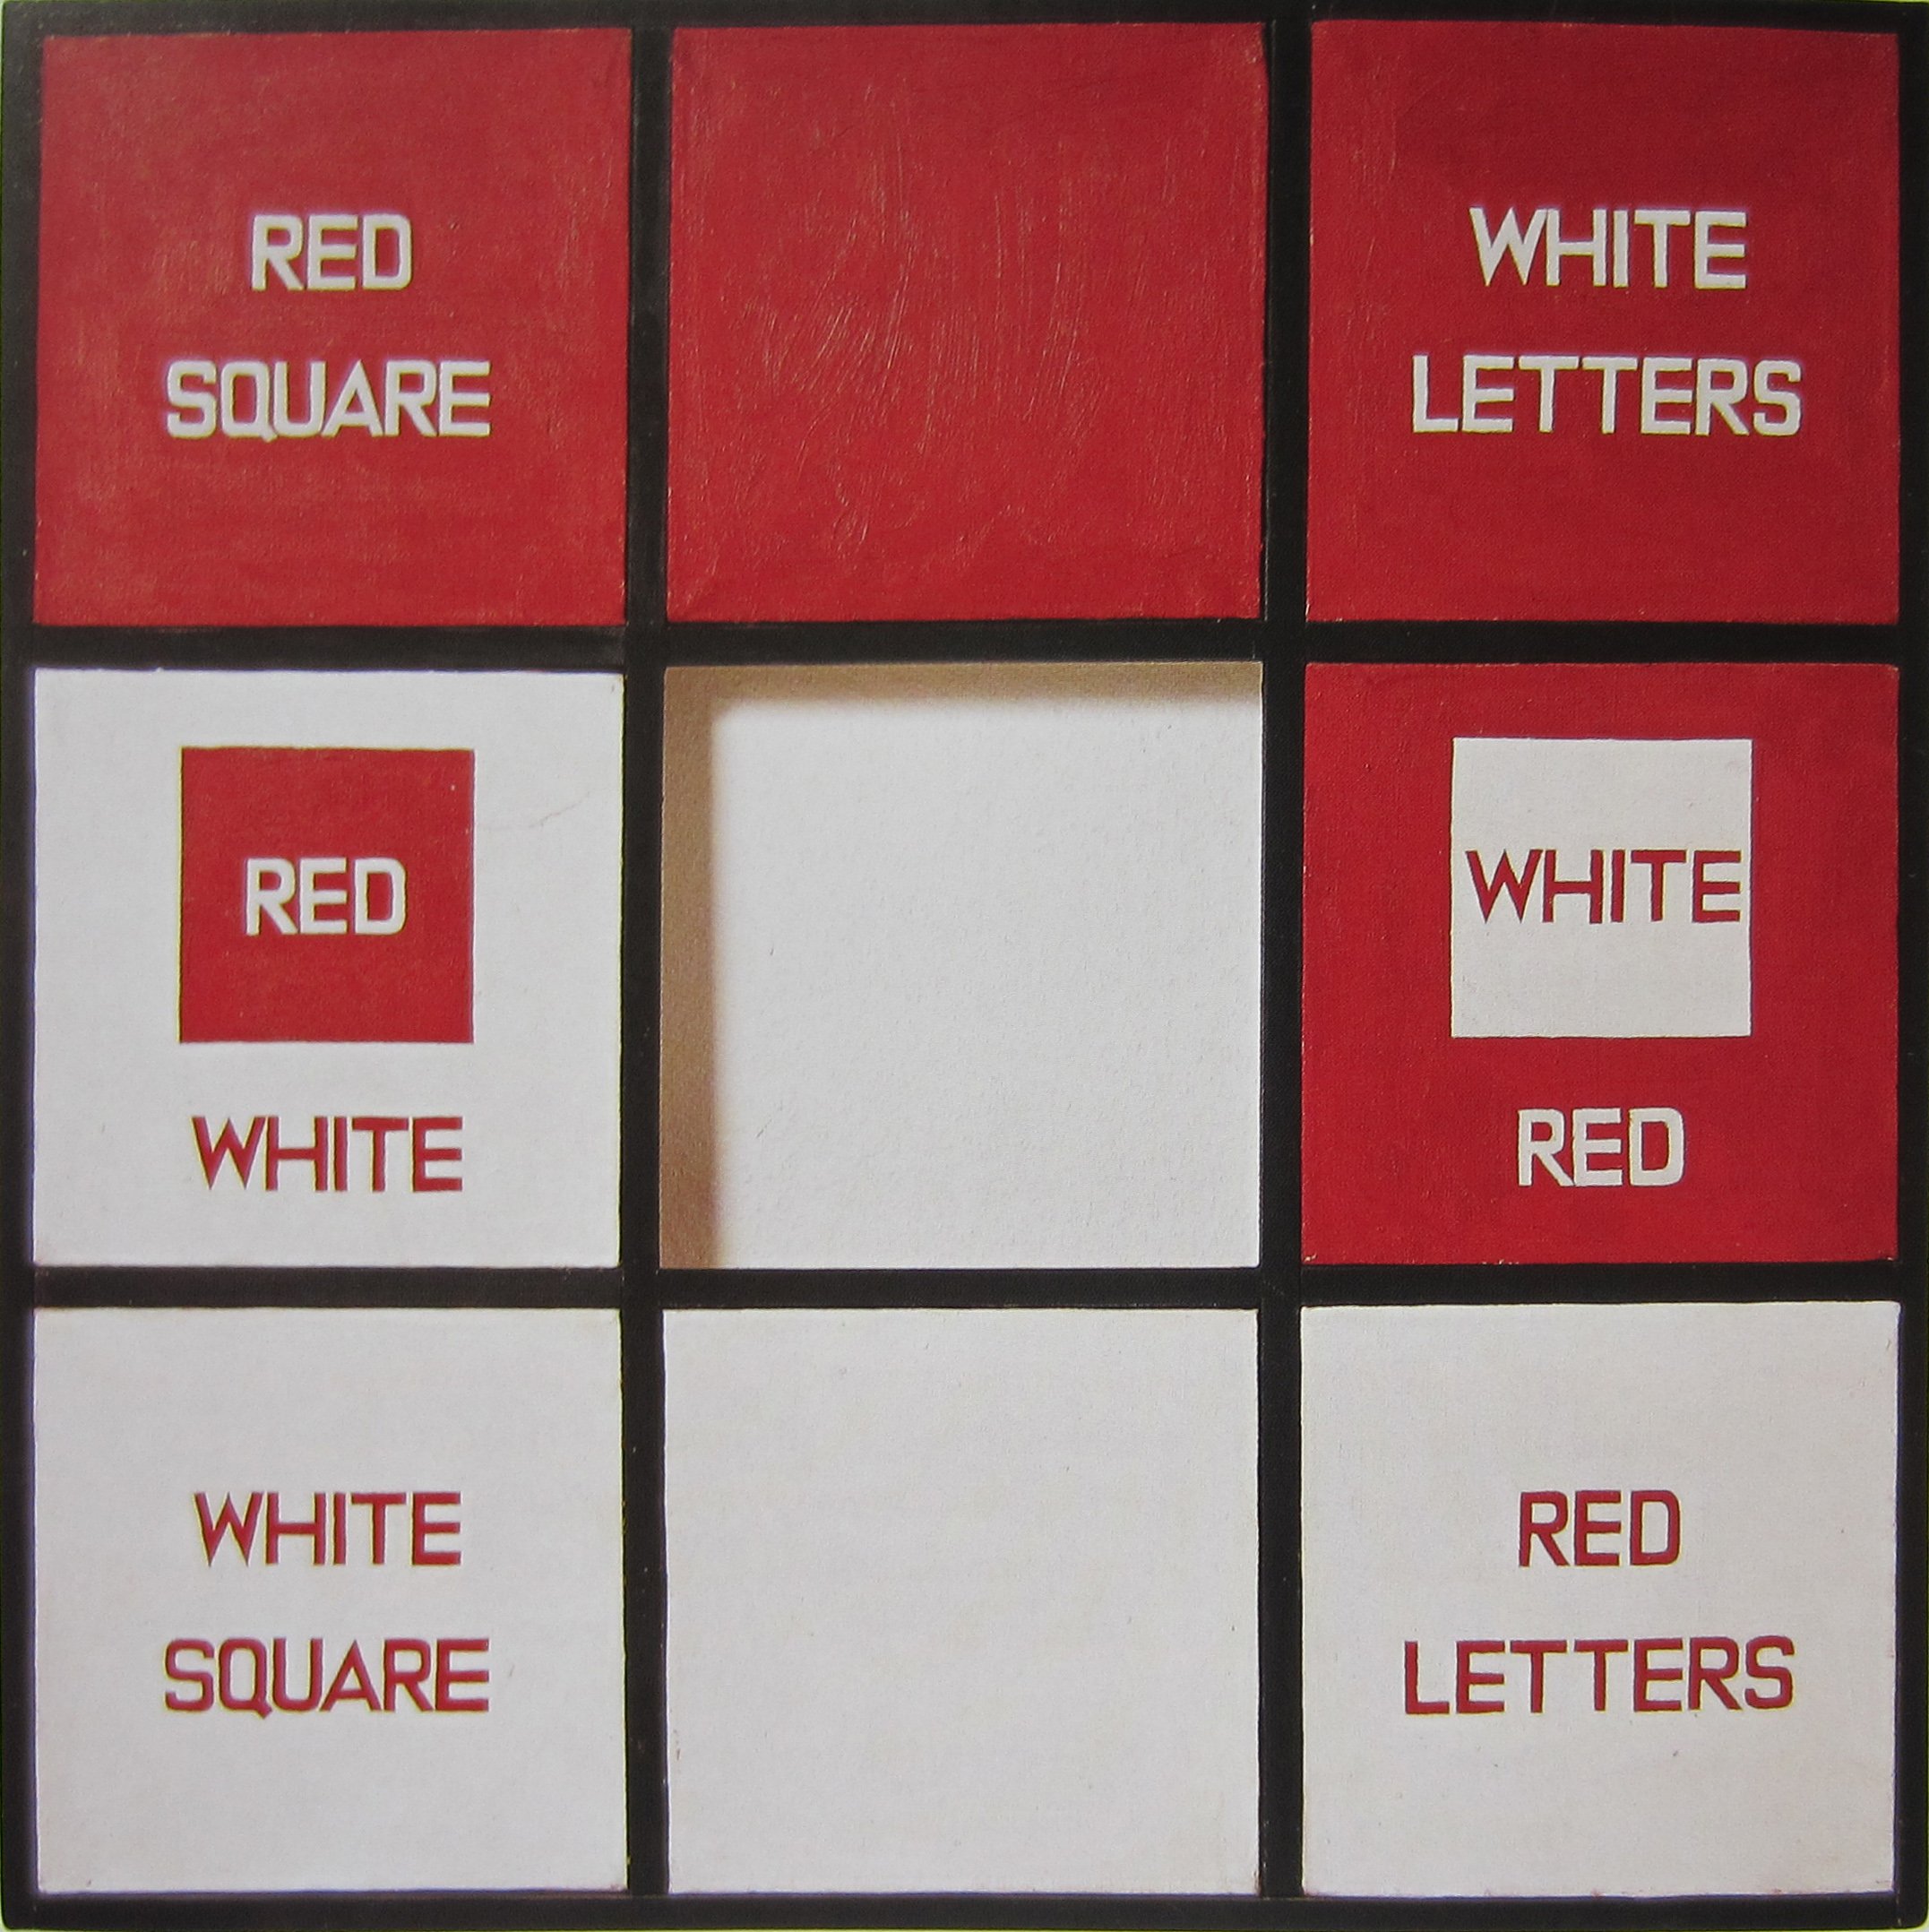 Christian Bok on X: Red Square and White Letters by Sol LeWitt